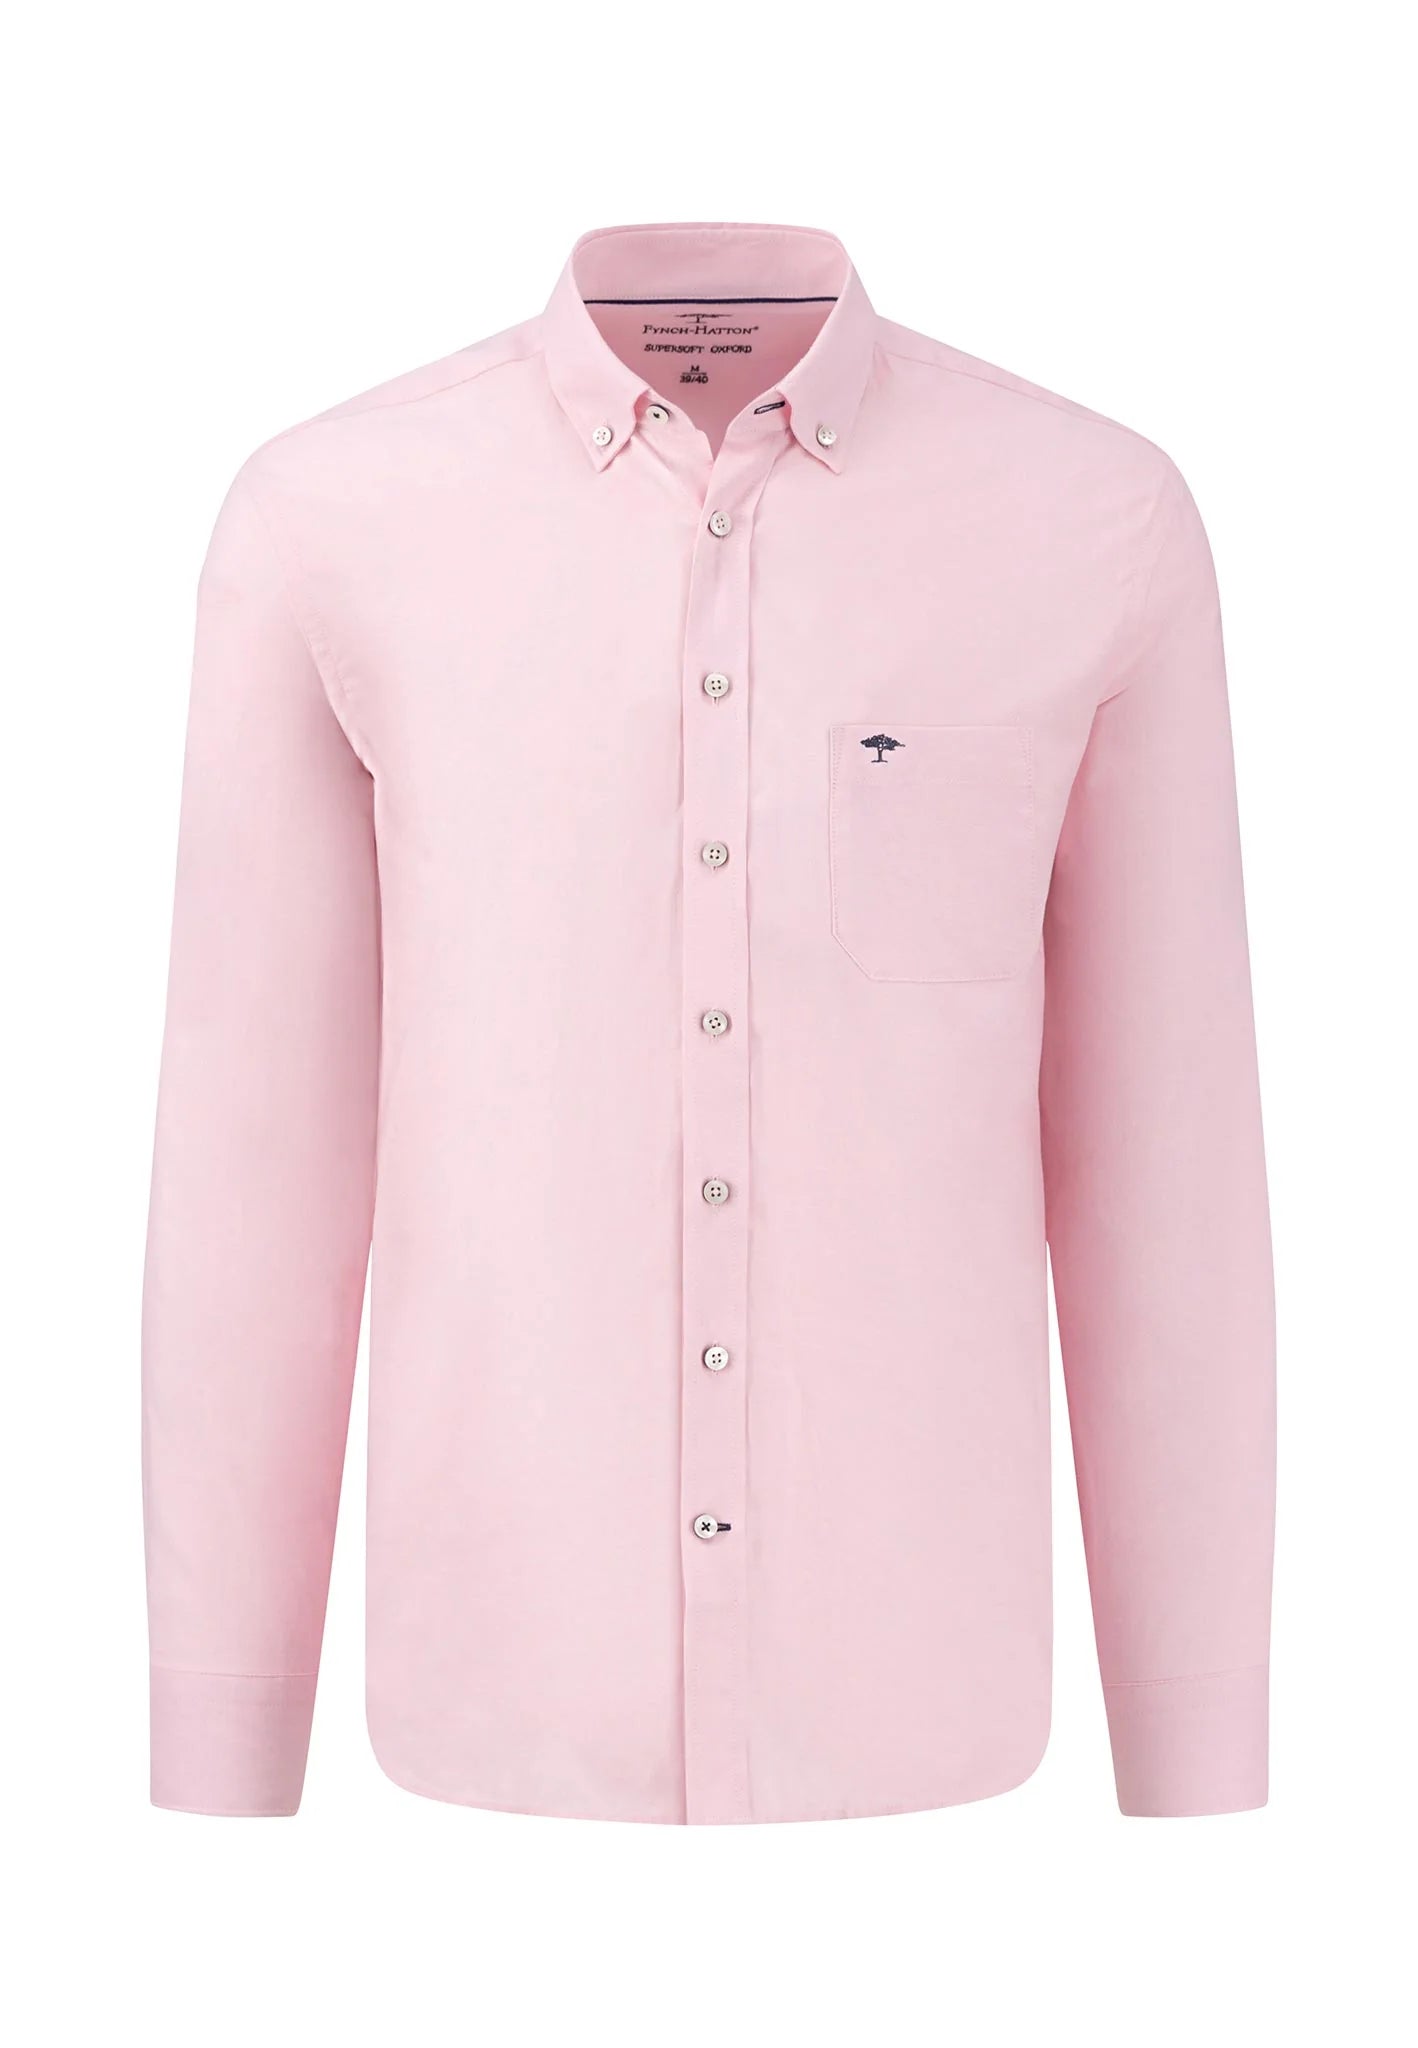 FYNCH-HATTON Oxford Made Of Soft Cotton, Pink –